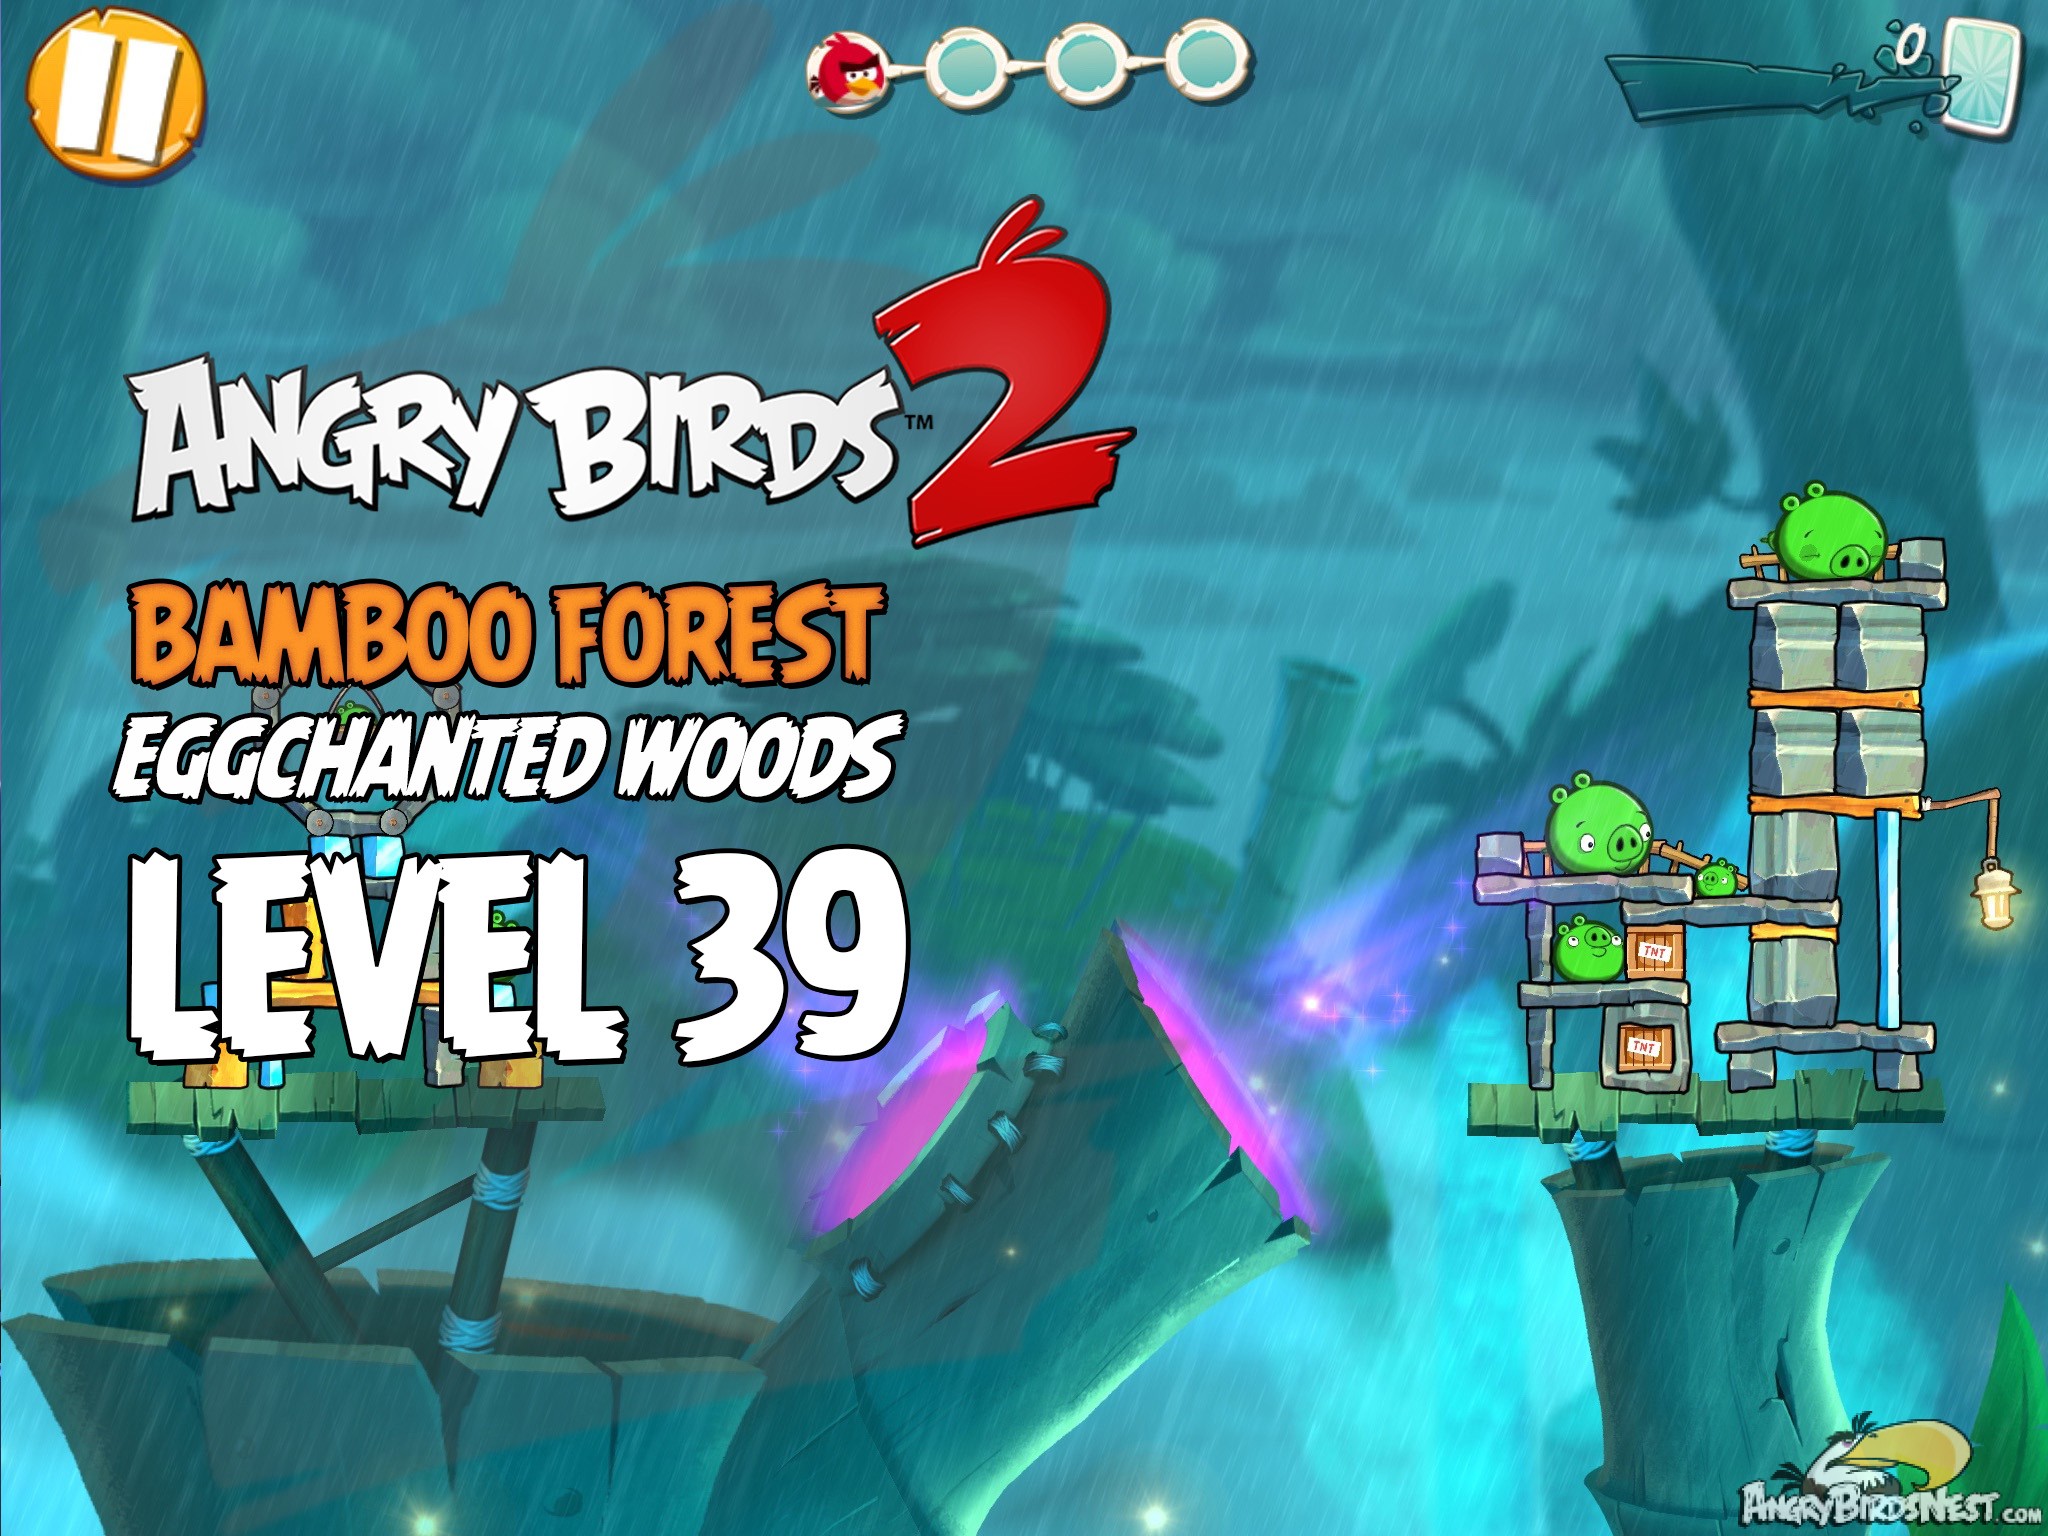 Angry Birds 2 Bamboo Forest Eggchanted Woods Level 39